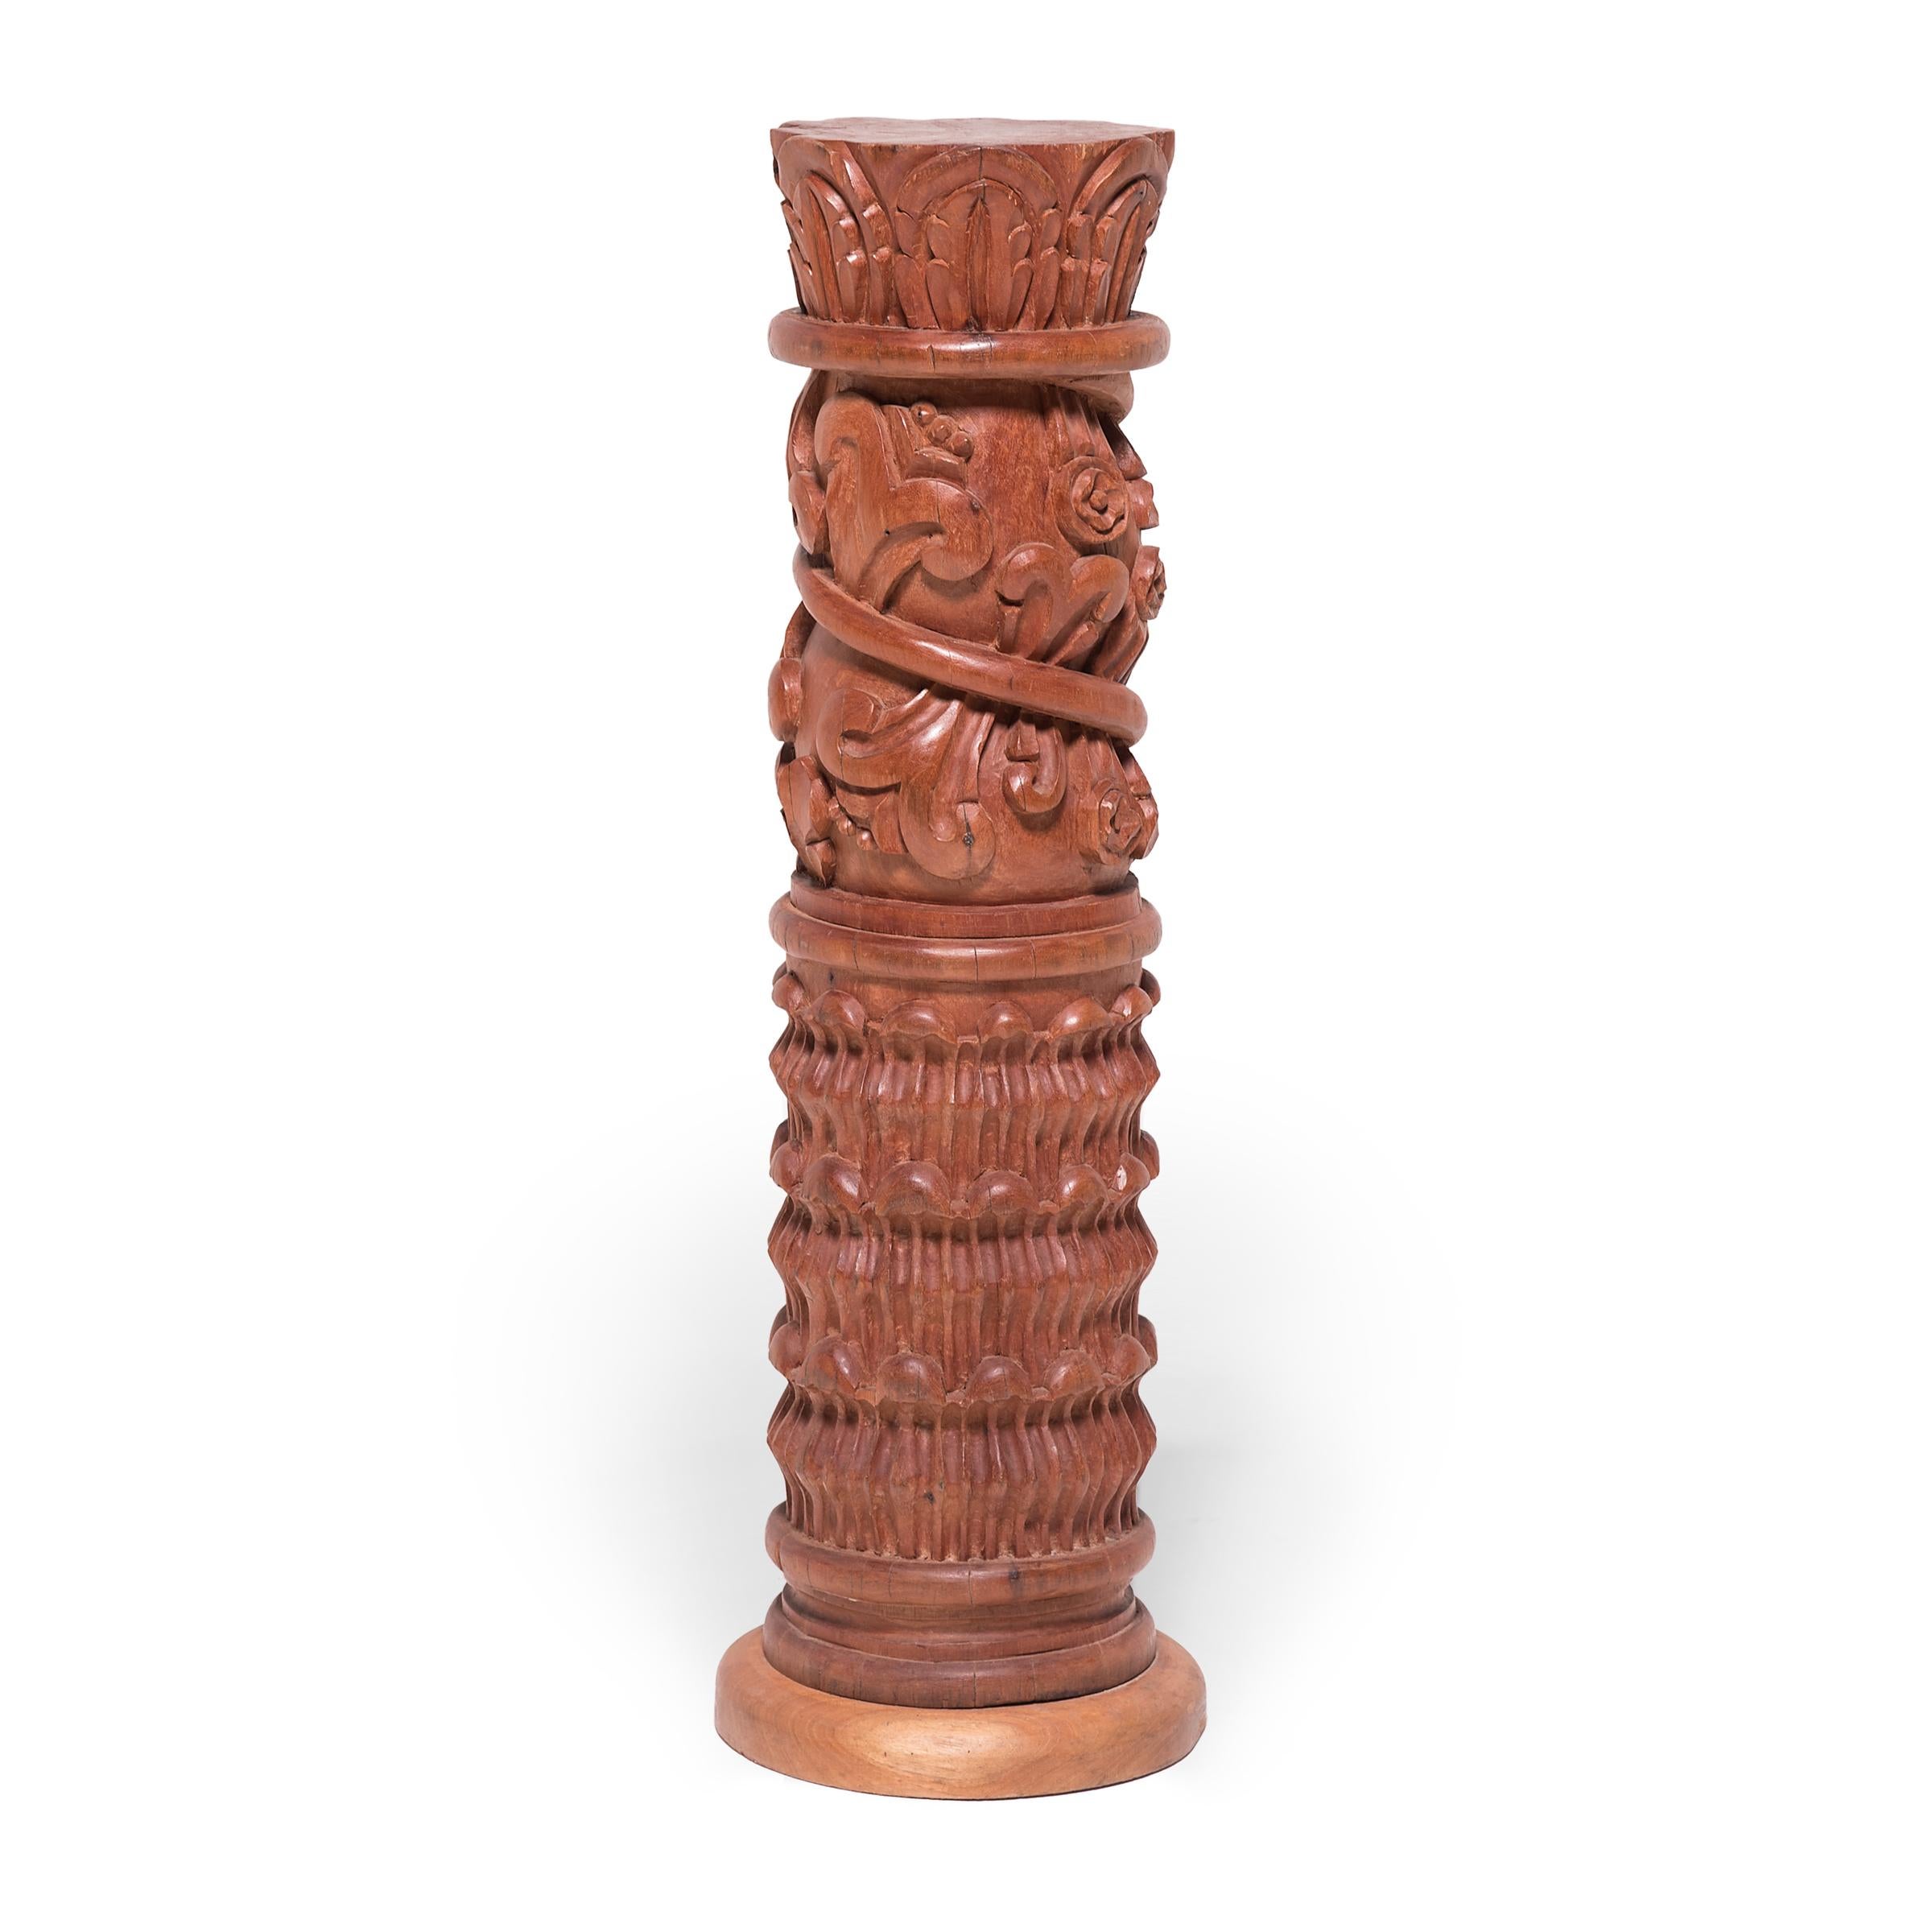 The Maya peoples of Guatemala created incredible works of art through columnar woodworking and stone shaping. The geometric vertical carvings provide a low field that flourishes into the foliated top half. As the vines crawl upward and become leaves